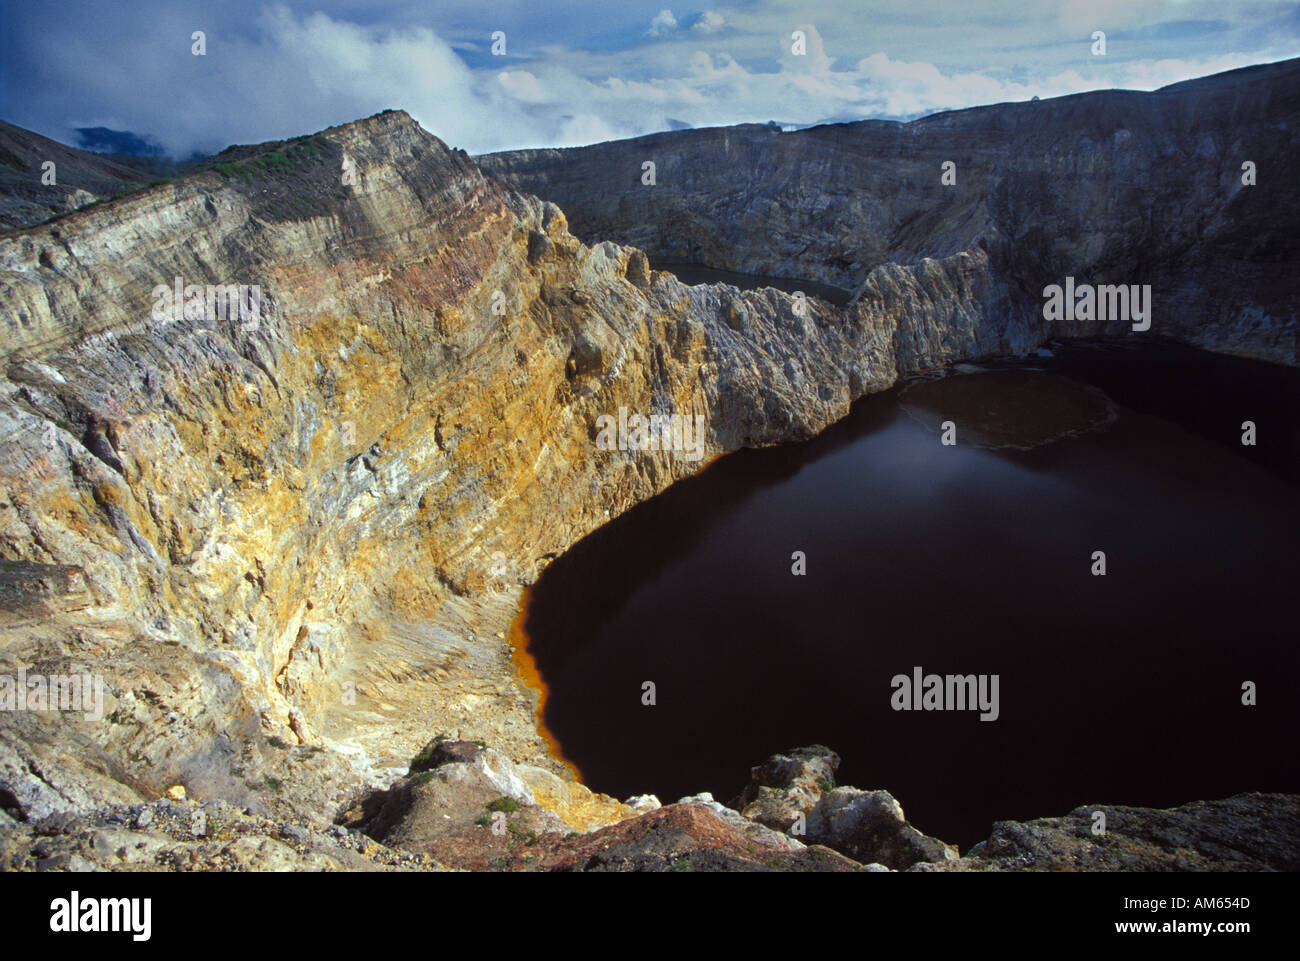 Indonesia Flores The Volcanic caldera of Kelimutu and its ever changing  multi coloured lakes caused by mineral deposits Stock Photo - Alamy